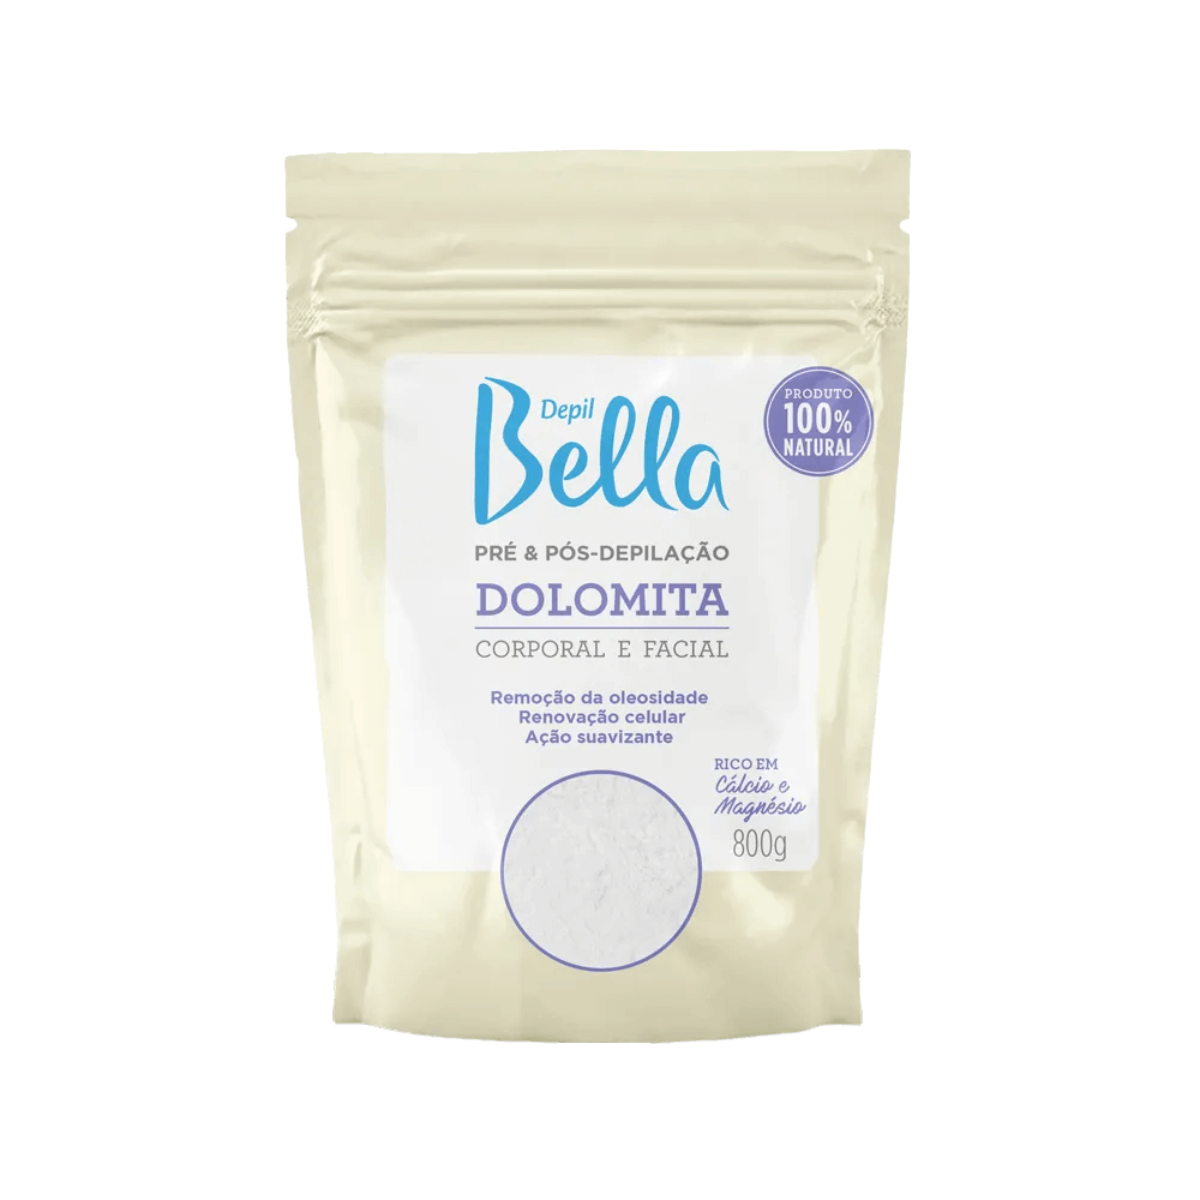 Dolomite powder for body and facial care by Depil Bella, 800g